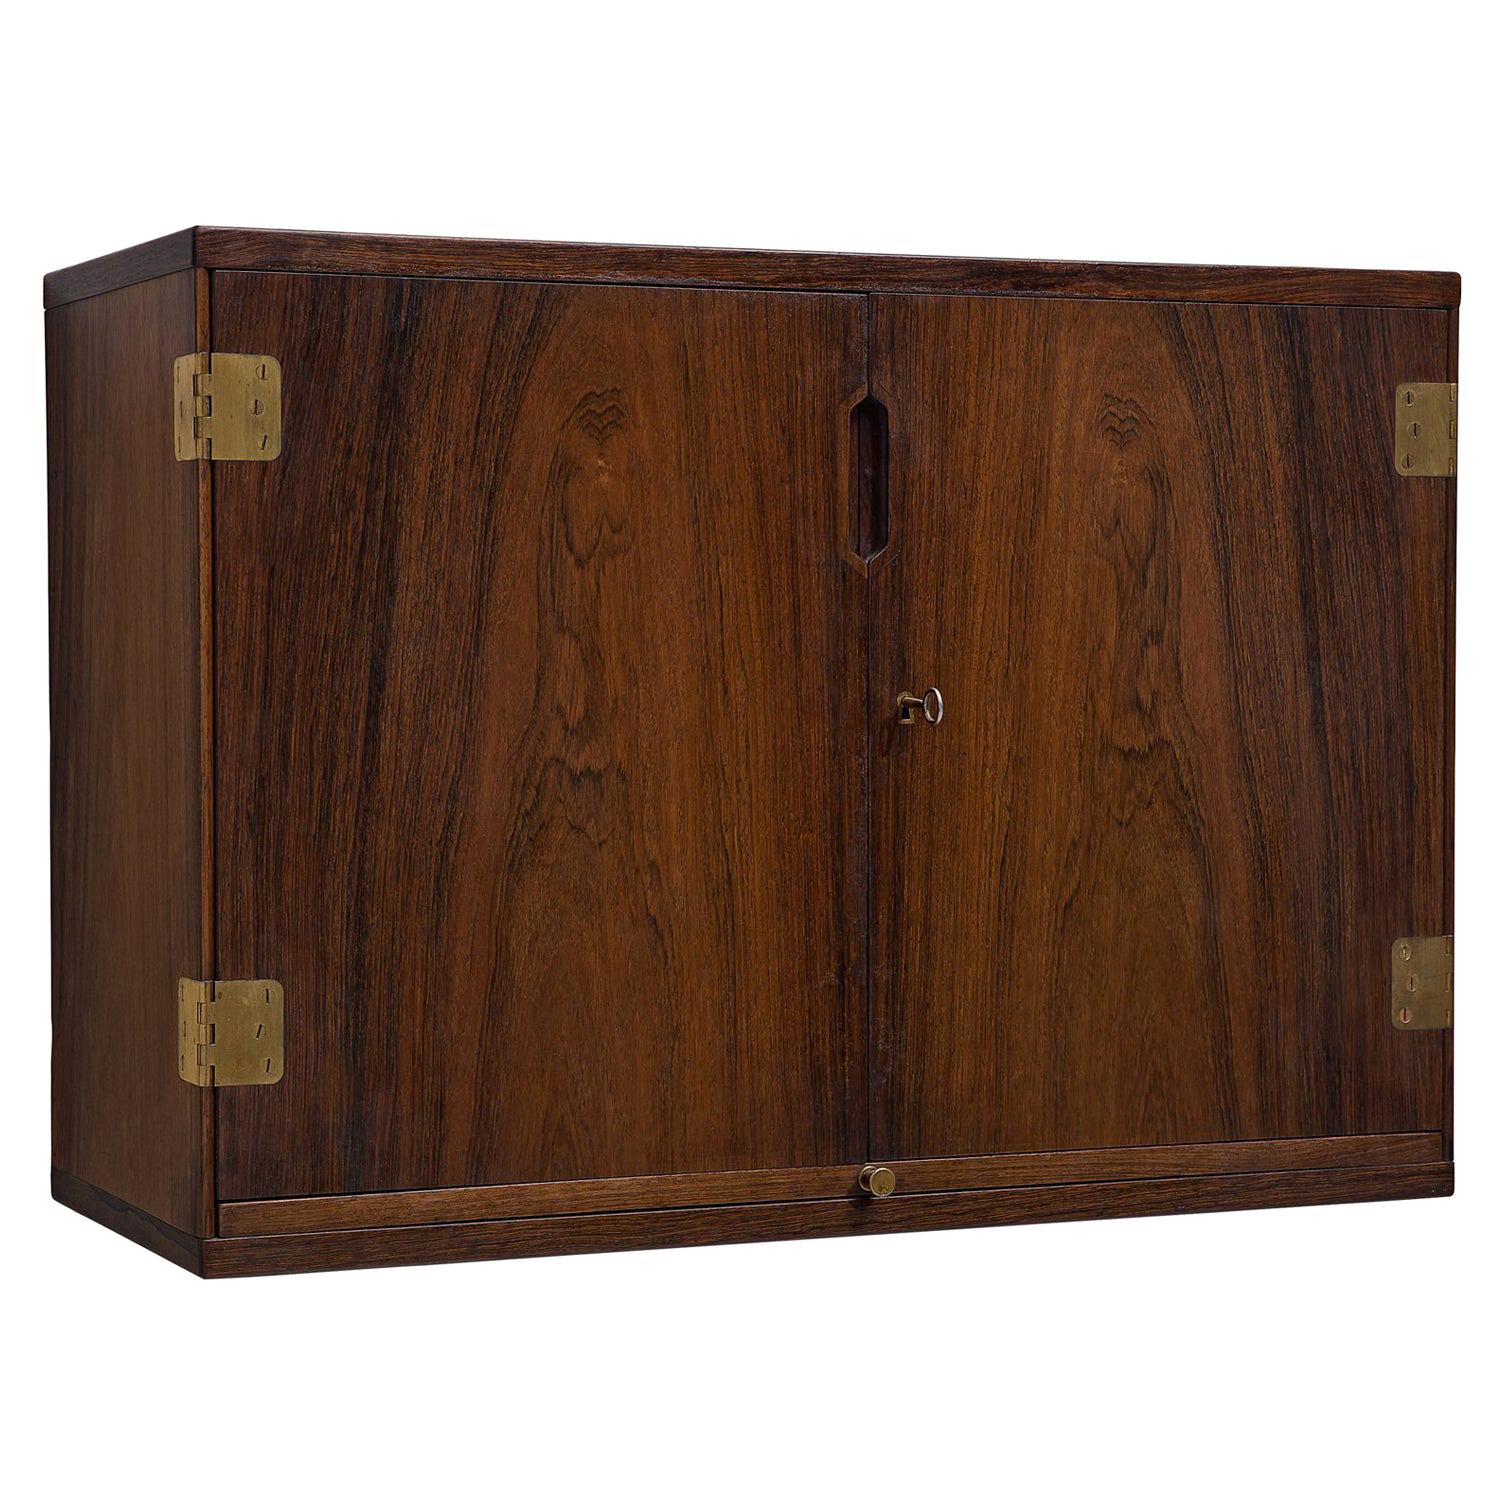 Svend Langkilde Wall Mounted Bar Cabinet in Rosewood